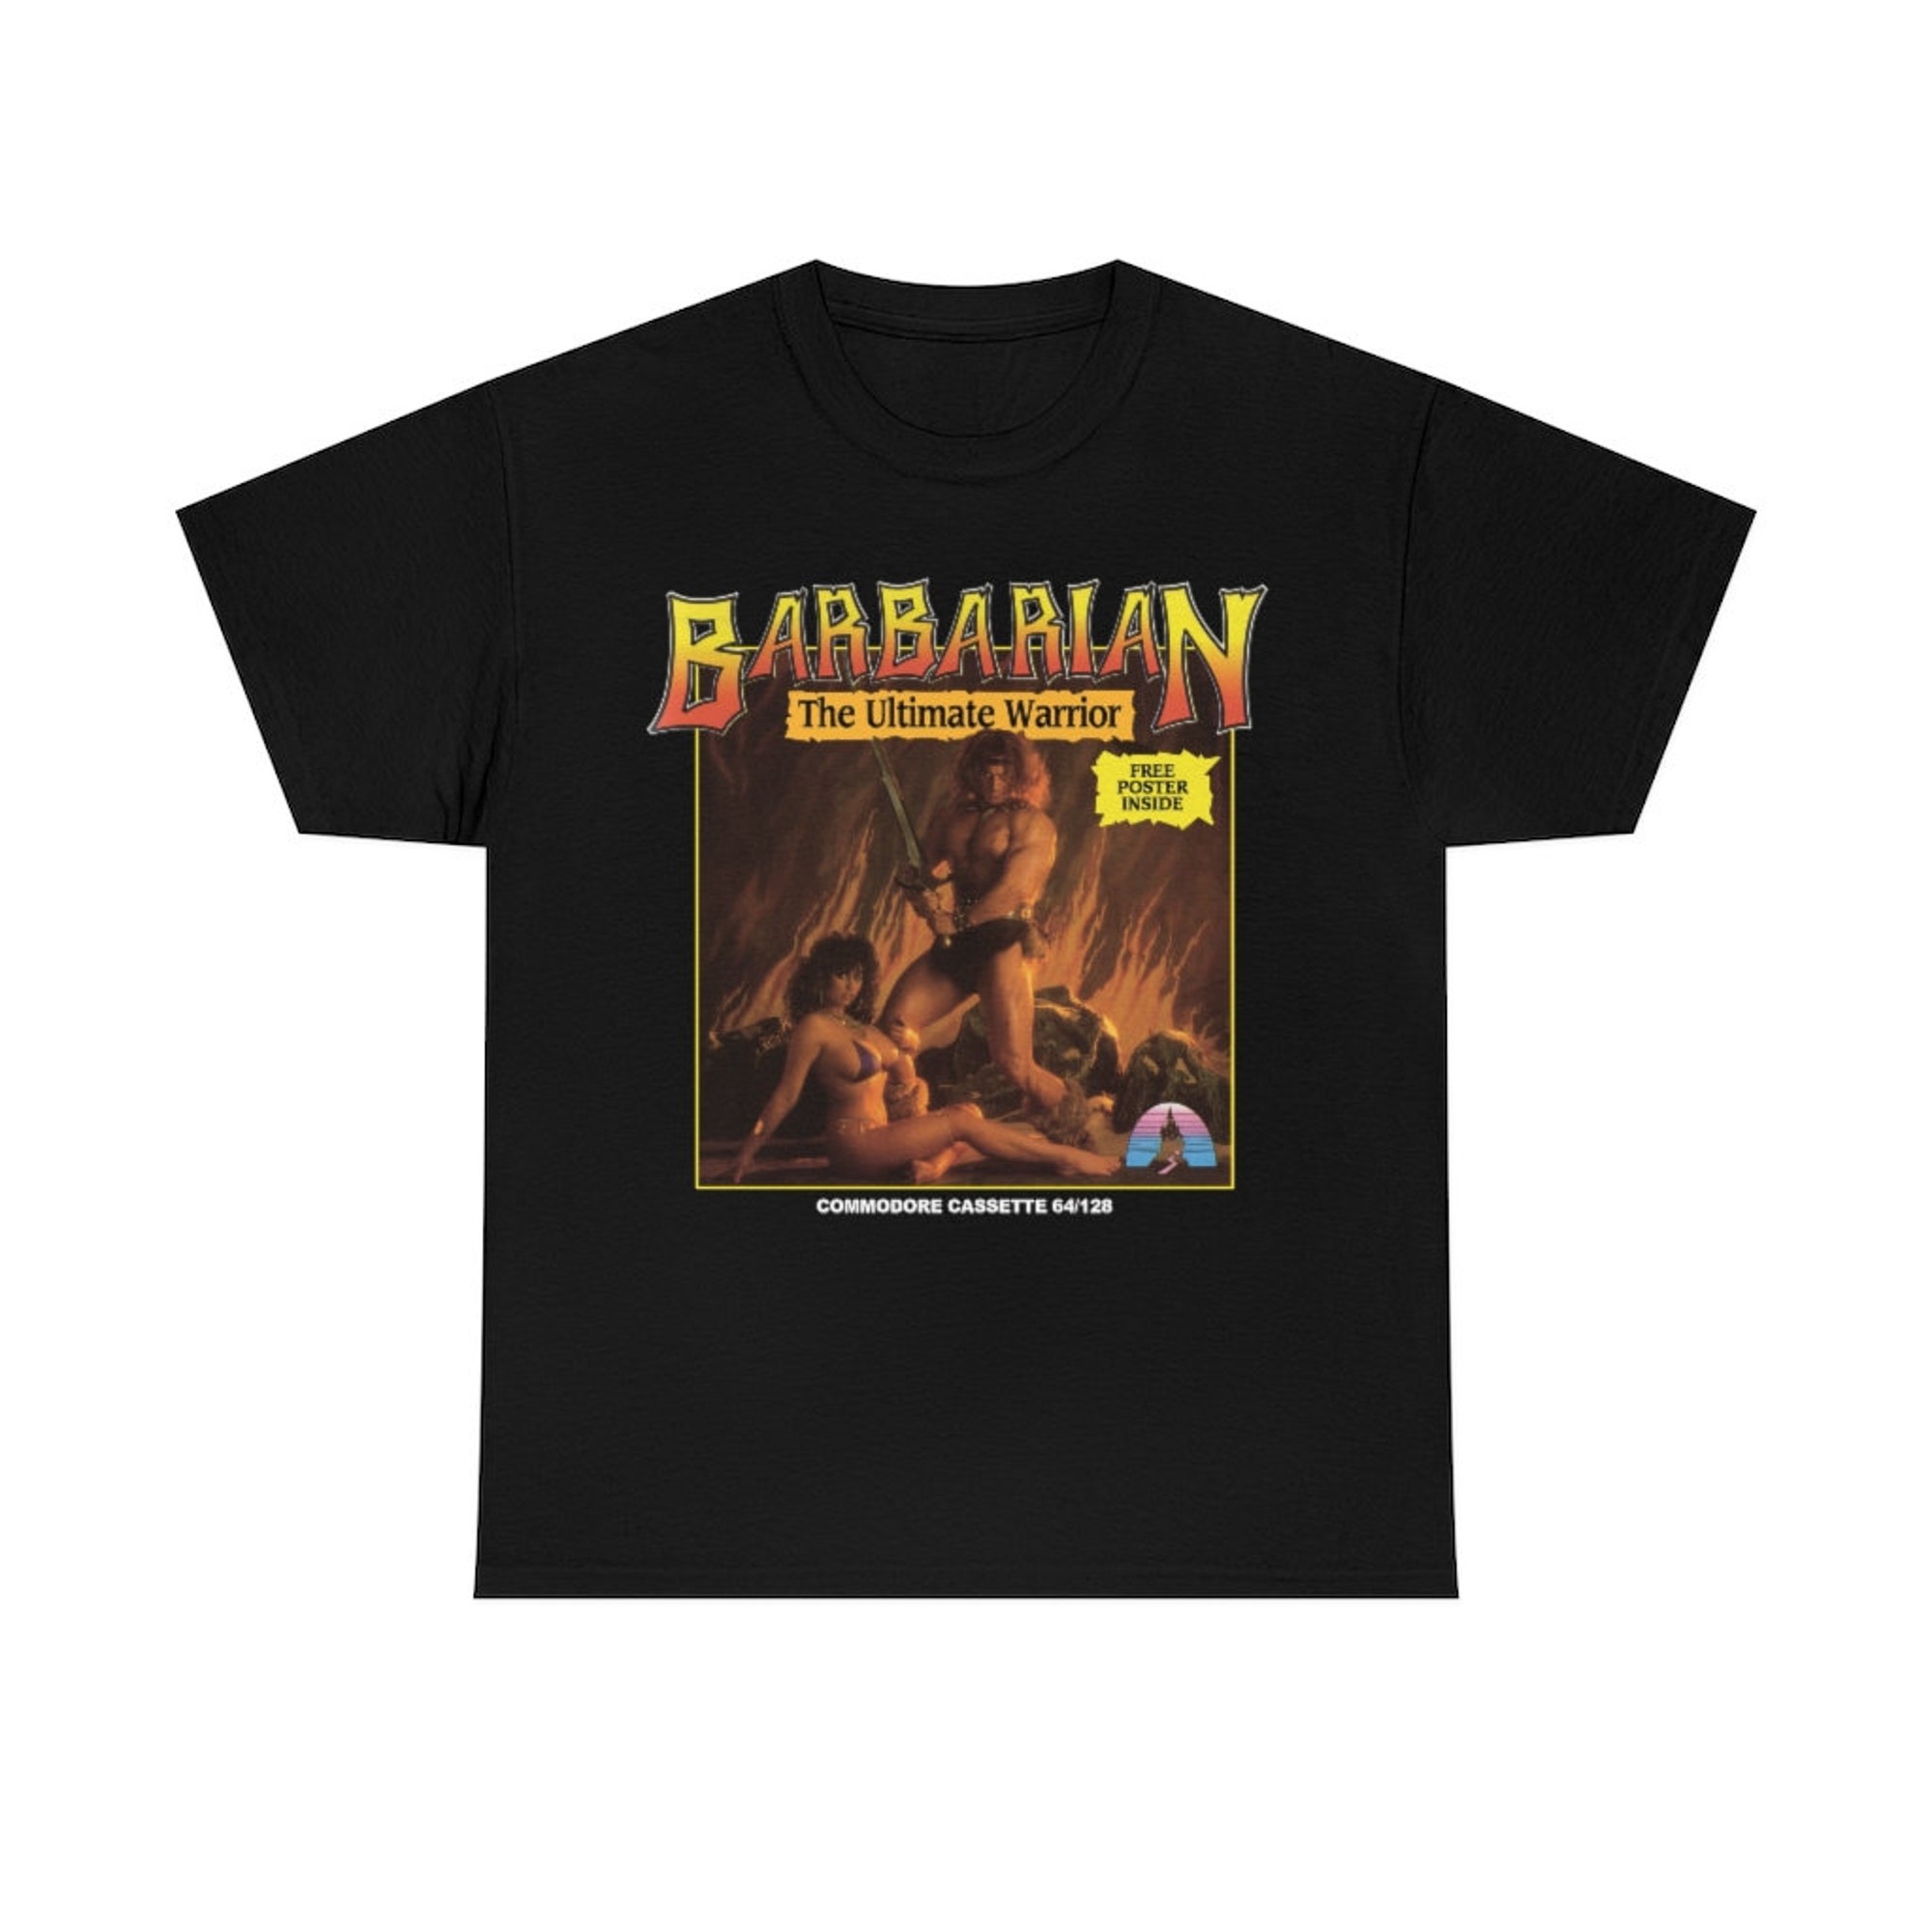 Discover Barbar "The Ultimate Warrior Poster Artwork" 1988 T-Shirt